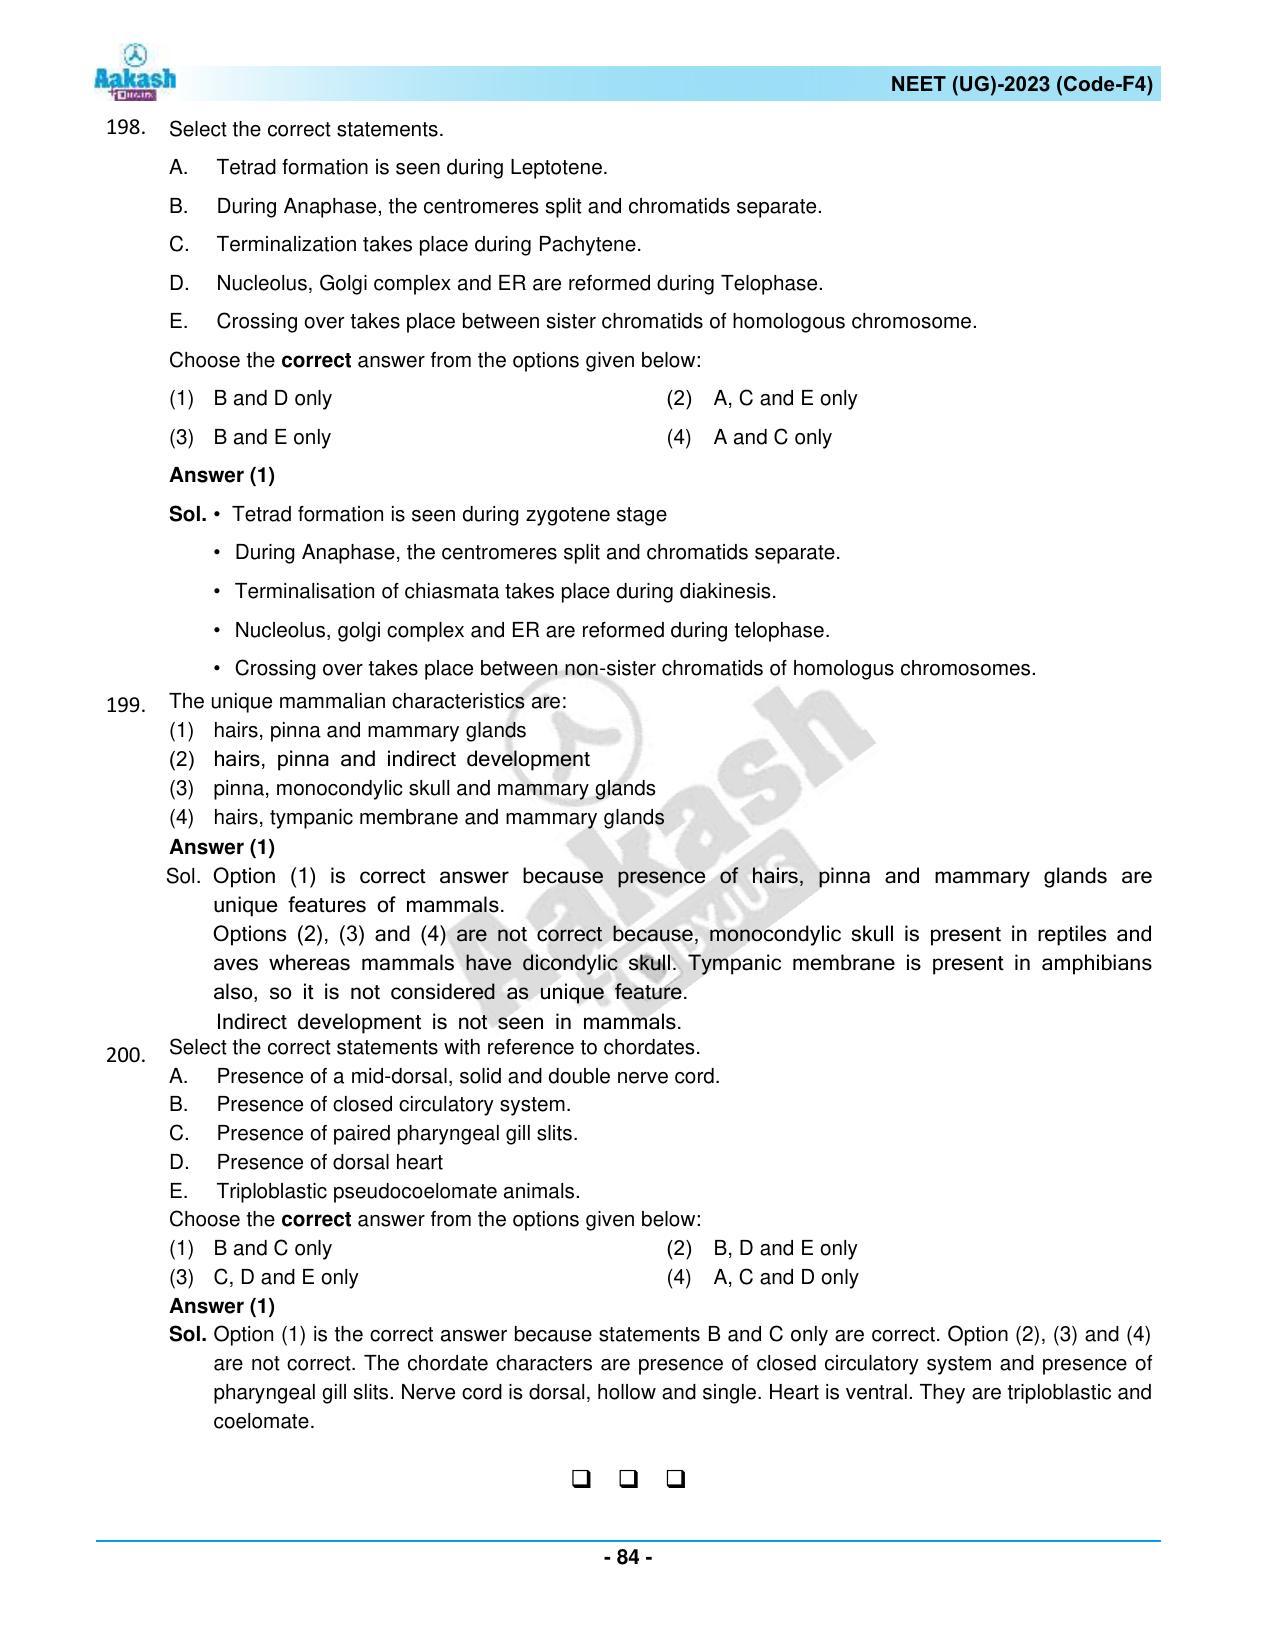 NEET 2023 Question Paper F4 - Page 84